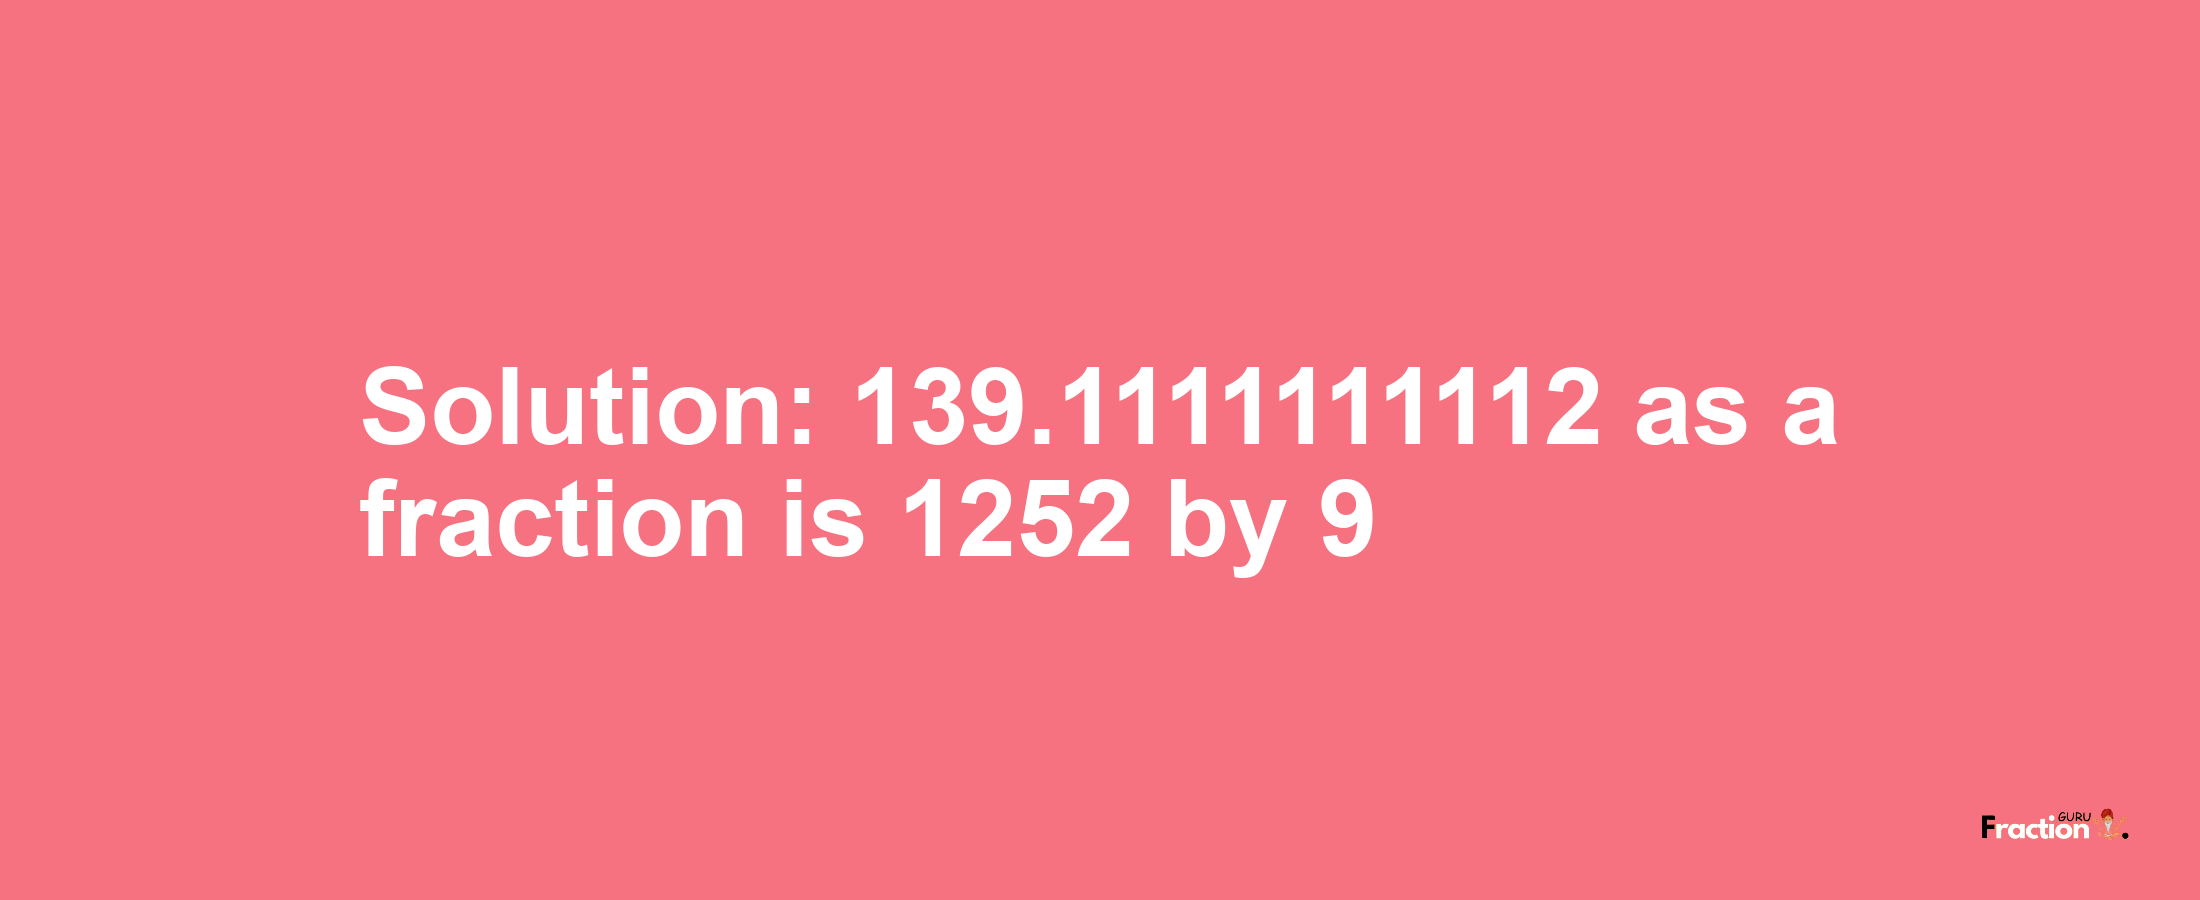 Solution:139.1111111112 as a fraction is 1252/9